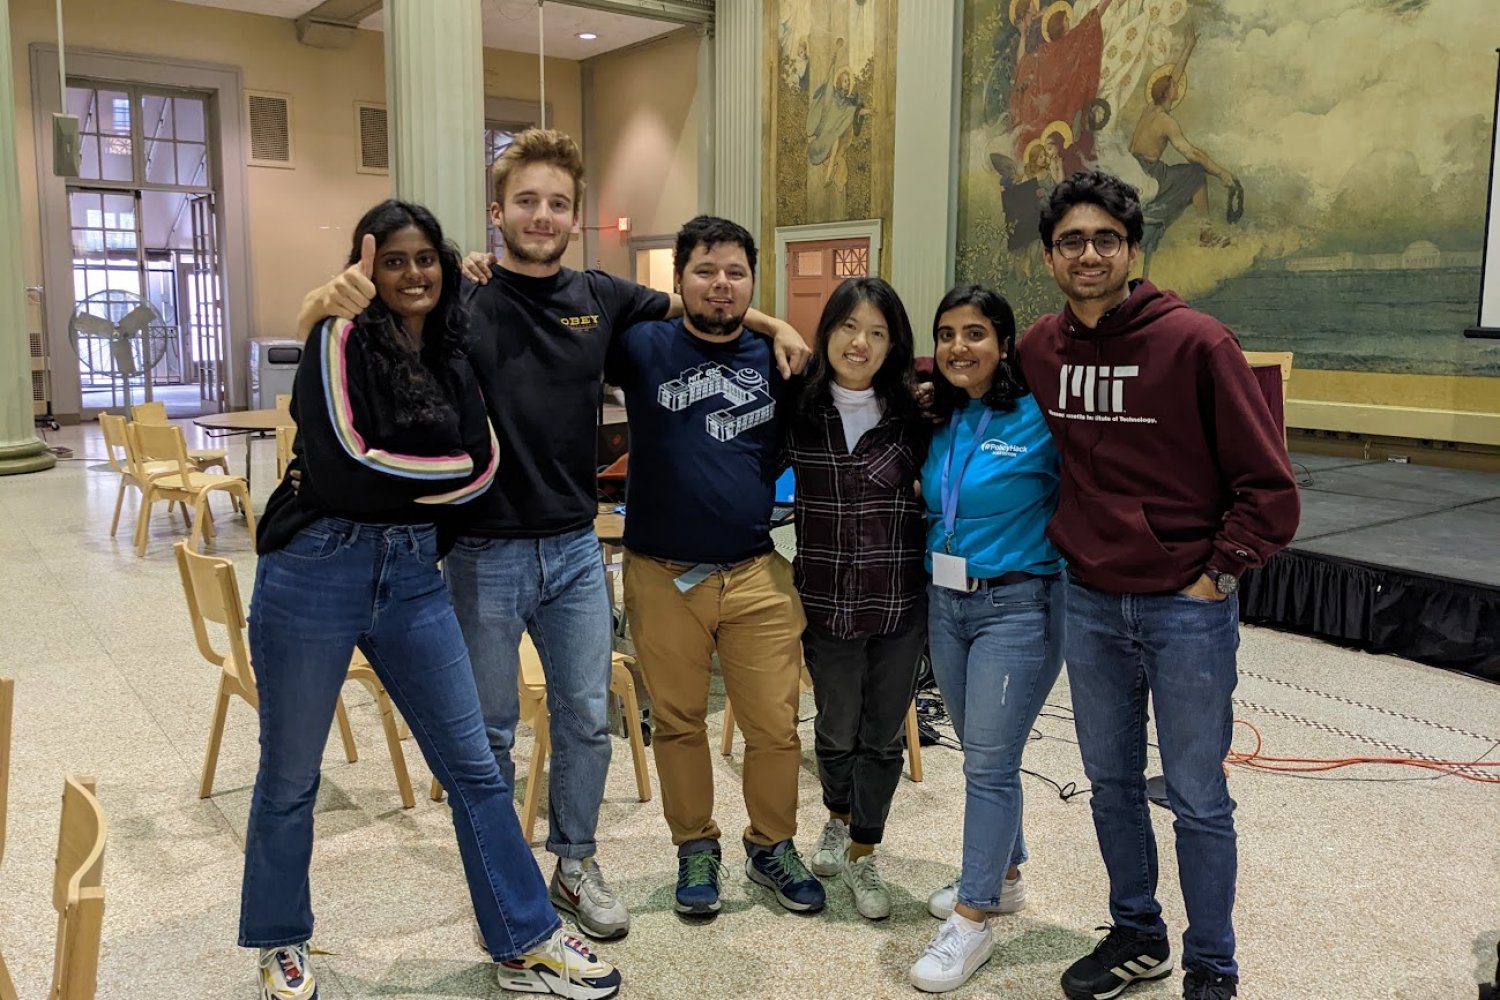 MIT Policy Hackathon produces new solutions for technology policy challenges | MIT News